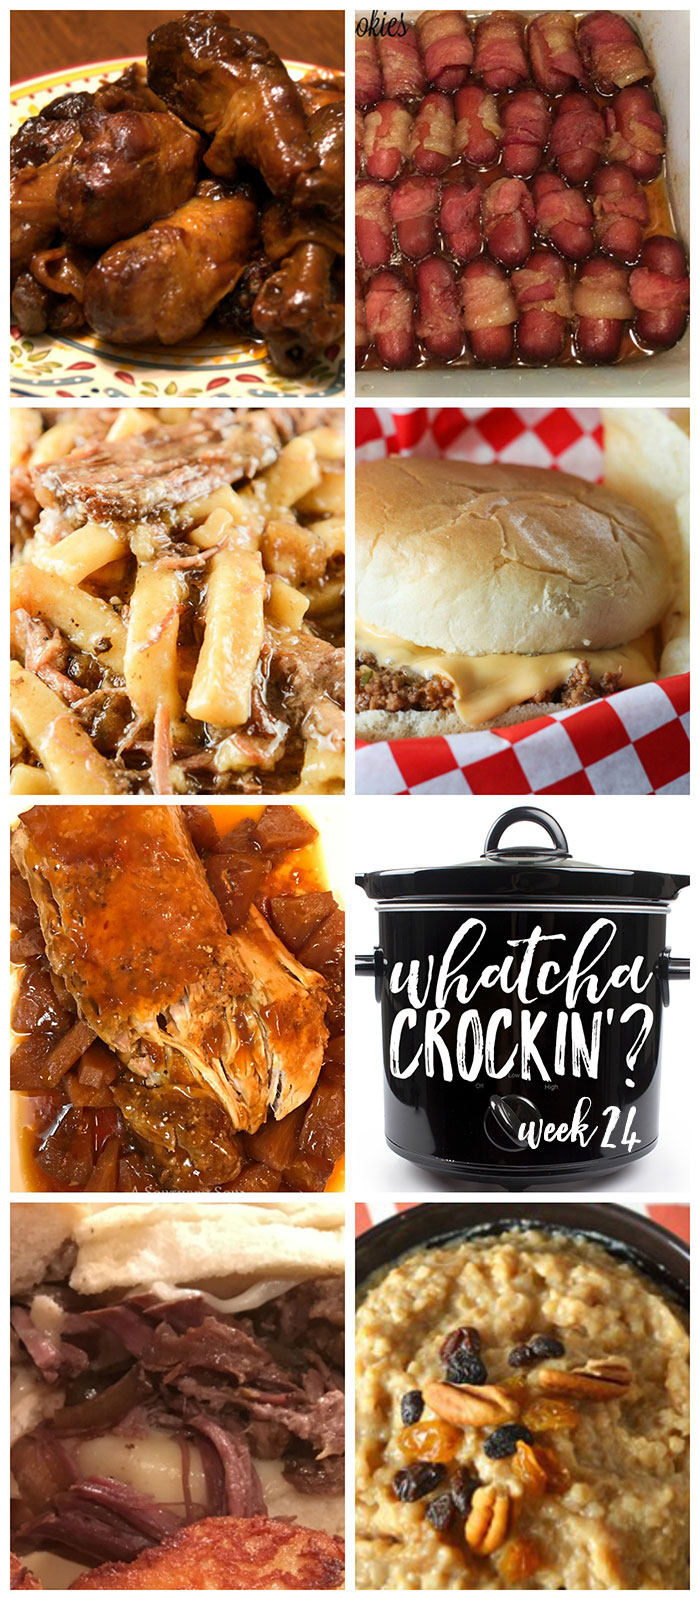 This week's Whatcha Crockin' crock pot recipes include Crock Pot Bacon Wrapped Smokies, Tavern Sandwiches, Crock Pot Sweet & Sour Pork Loin with Pineapple, Brown Sugar Oatmeal, Slow Cooker Beef and Noodles, Last Resort Chicken Legs, French Dip Sandwiches and much more!